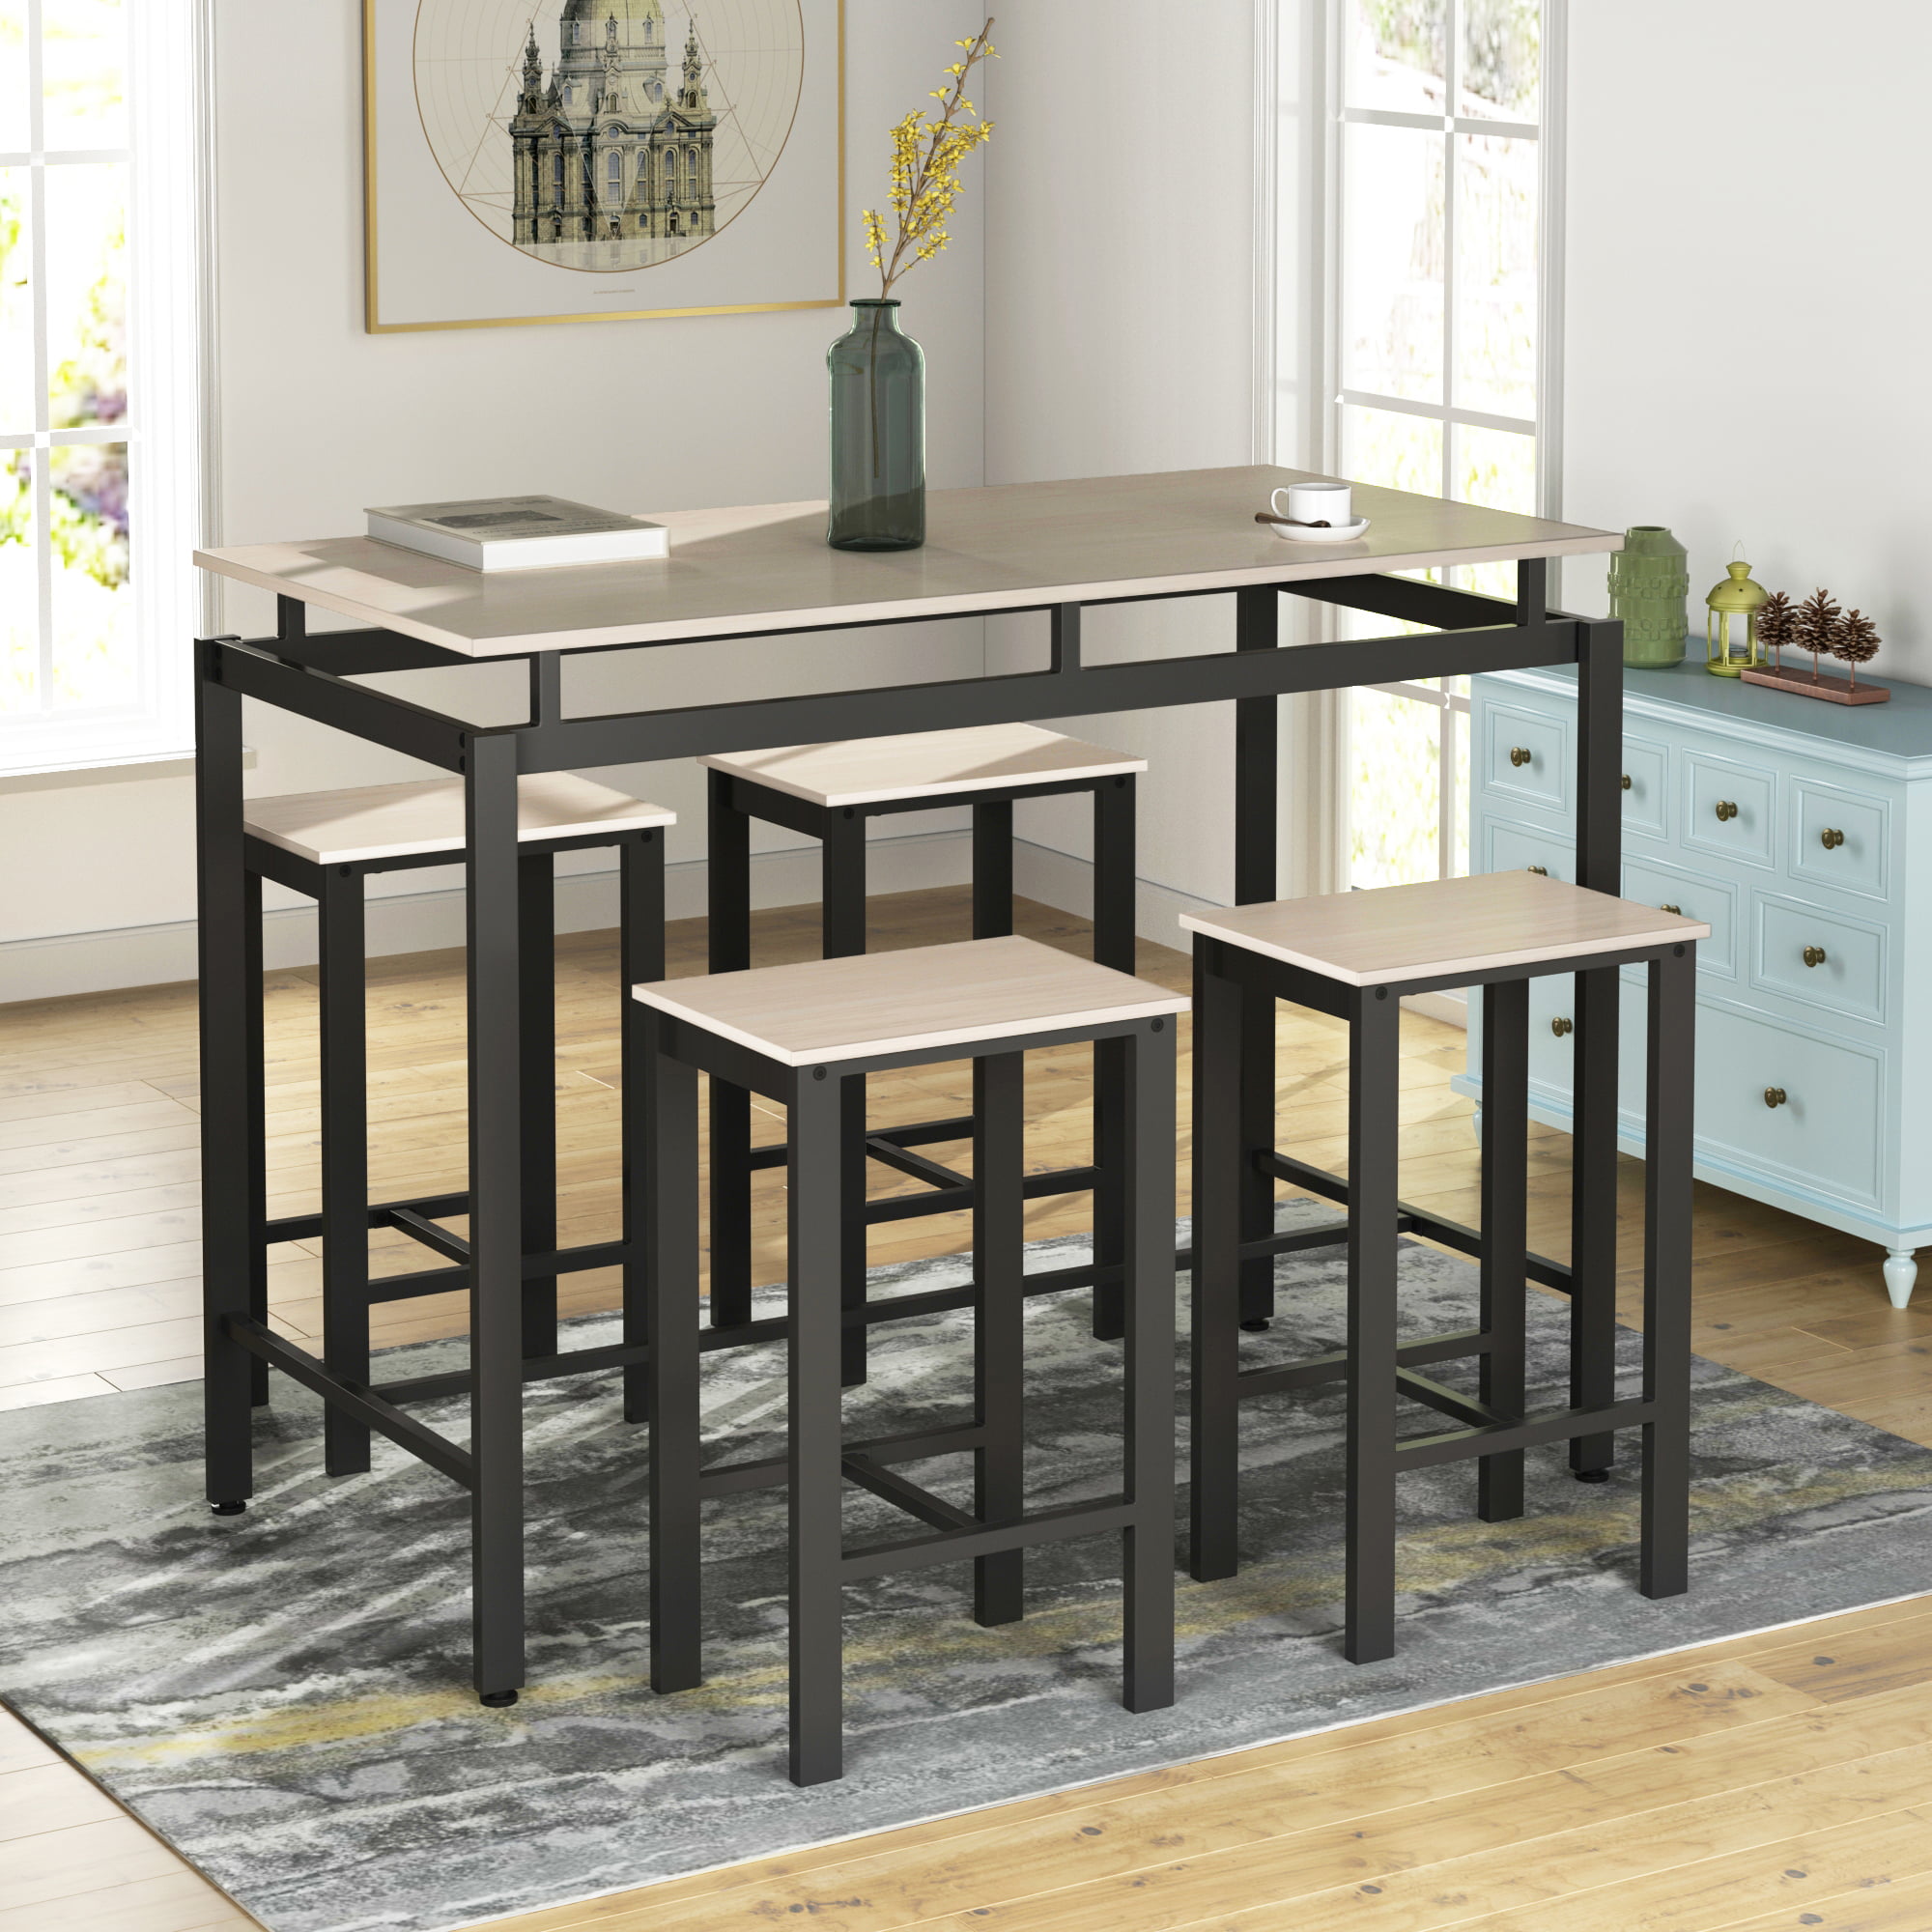 5 Piece Bar Table Set Kitchen Counter Height Table with 4 